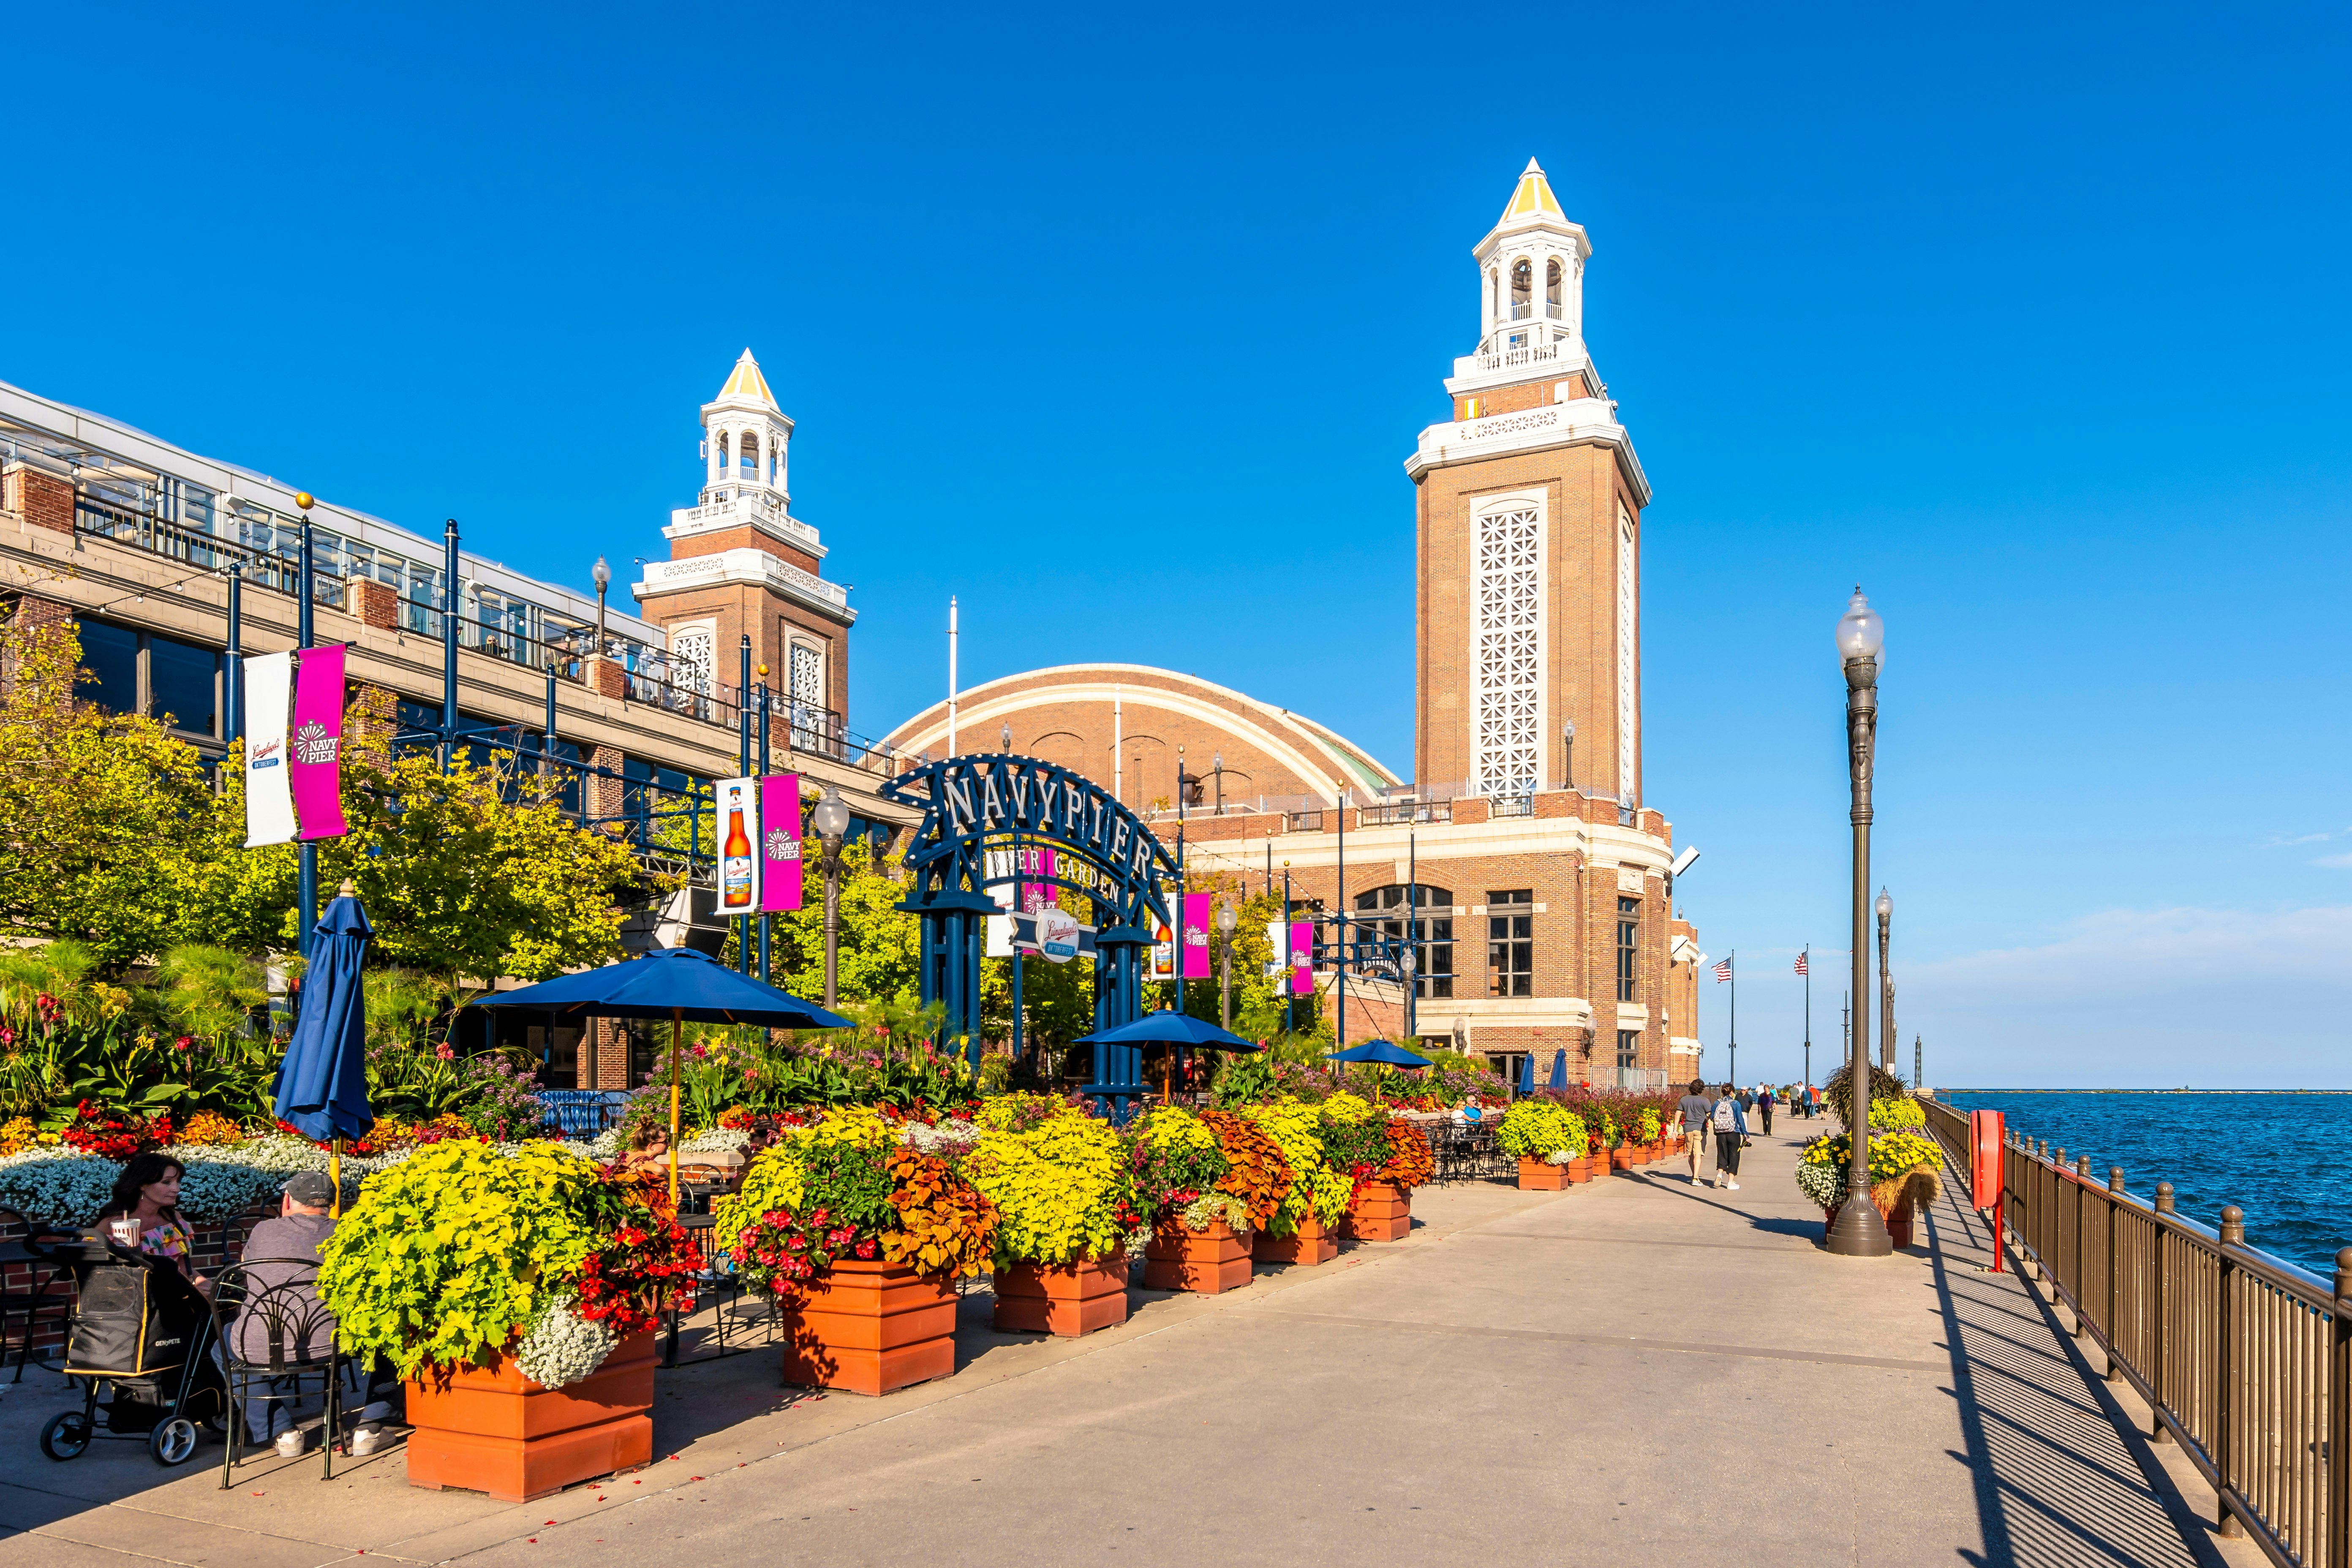 A red-brick building with two towers at the end of pier; the exterior is decorated with potted plants and trees.